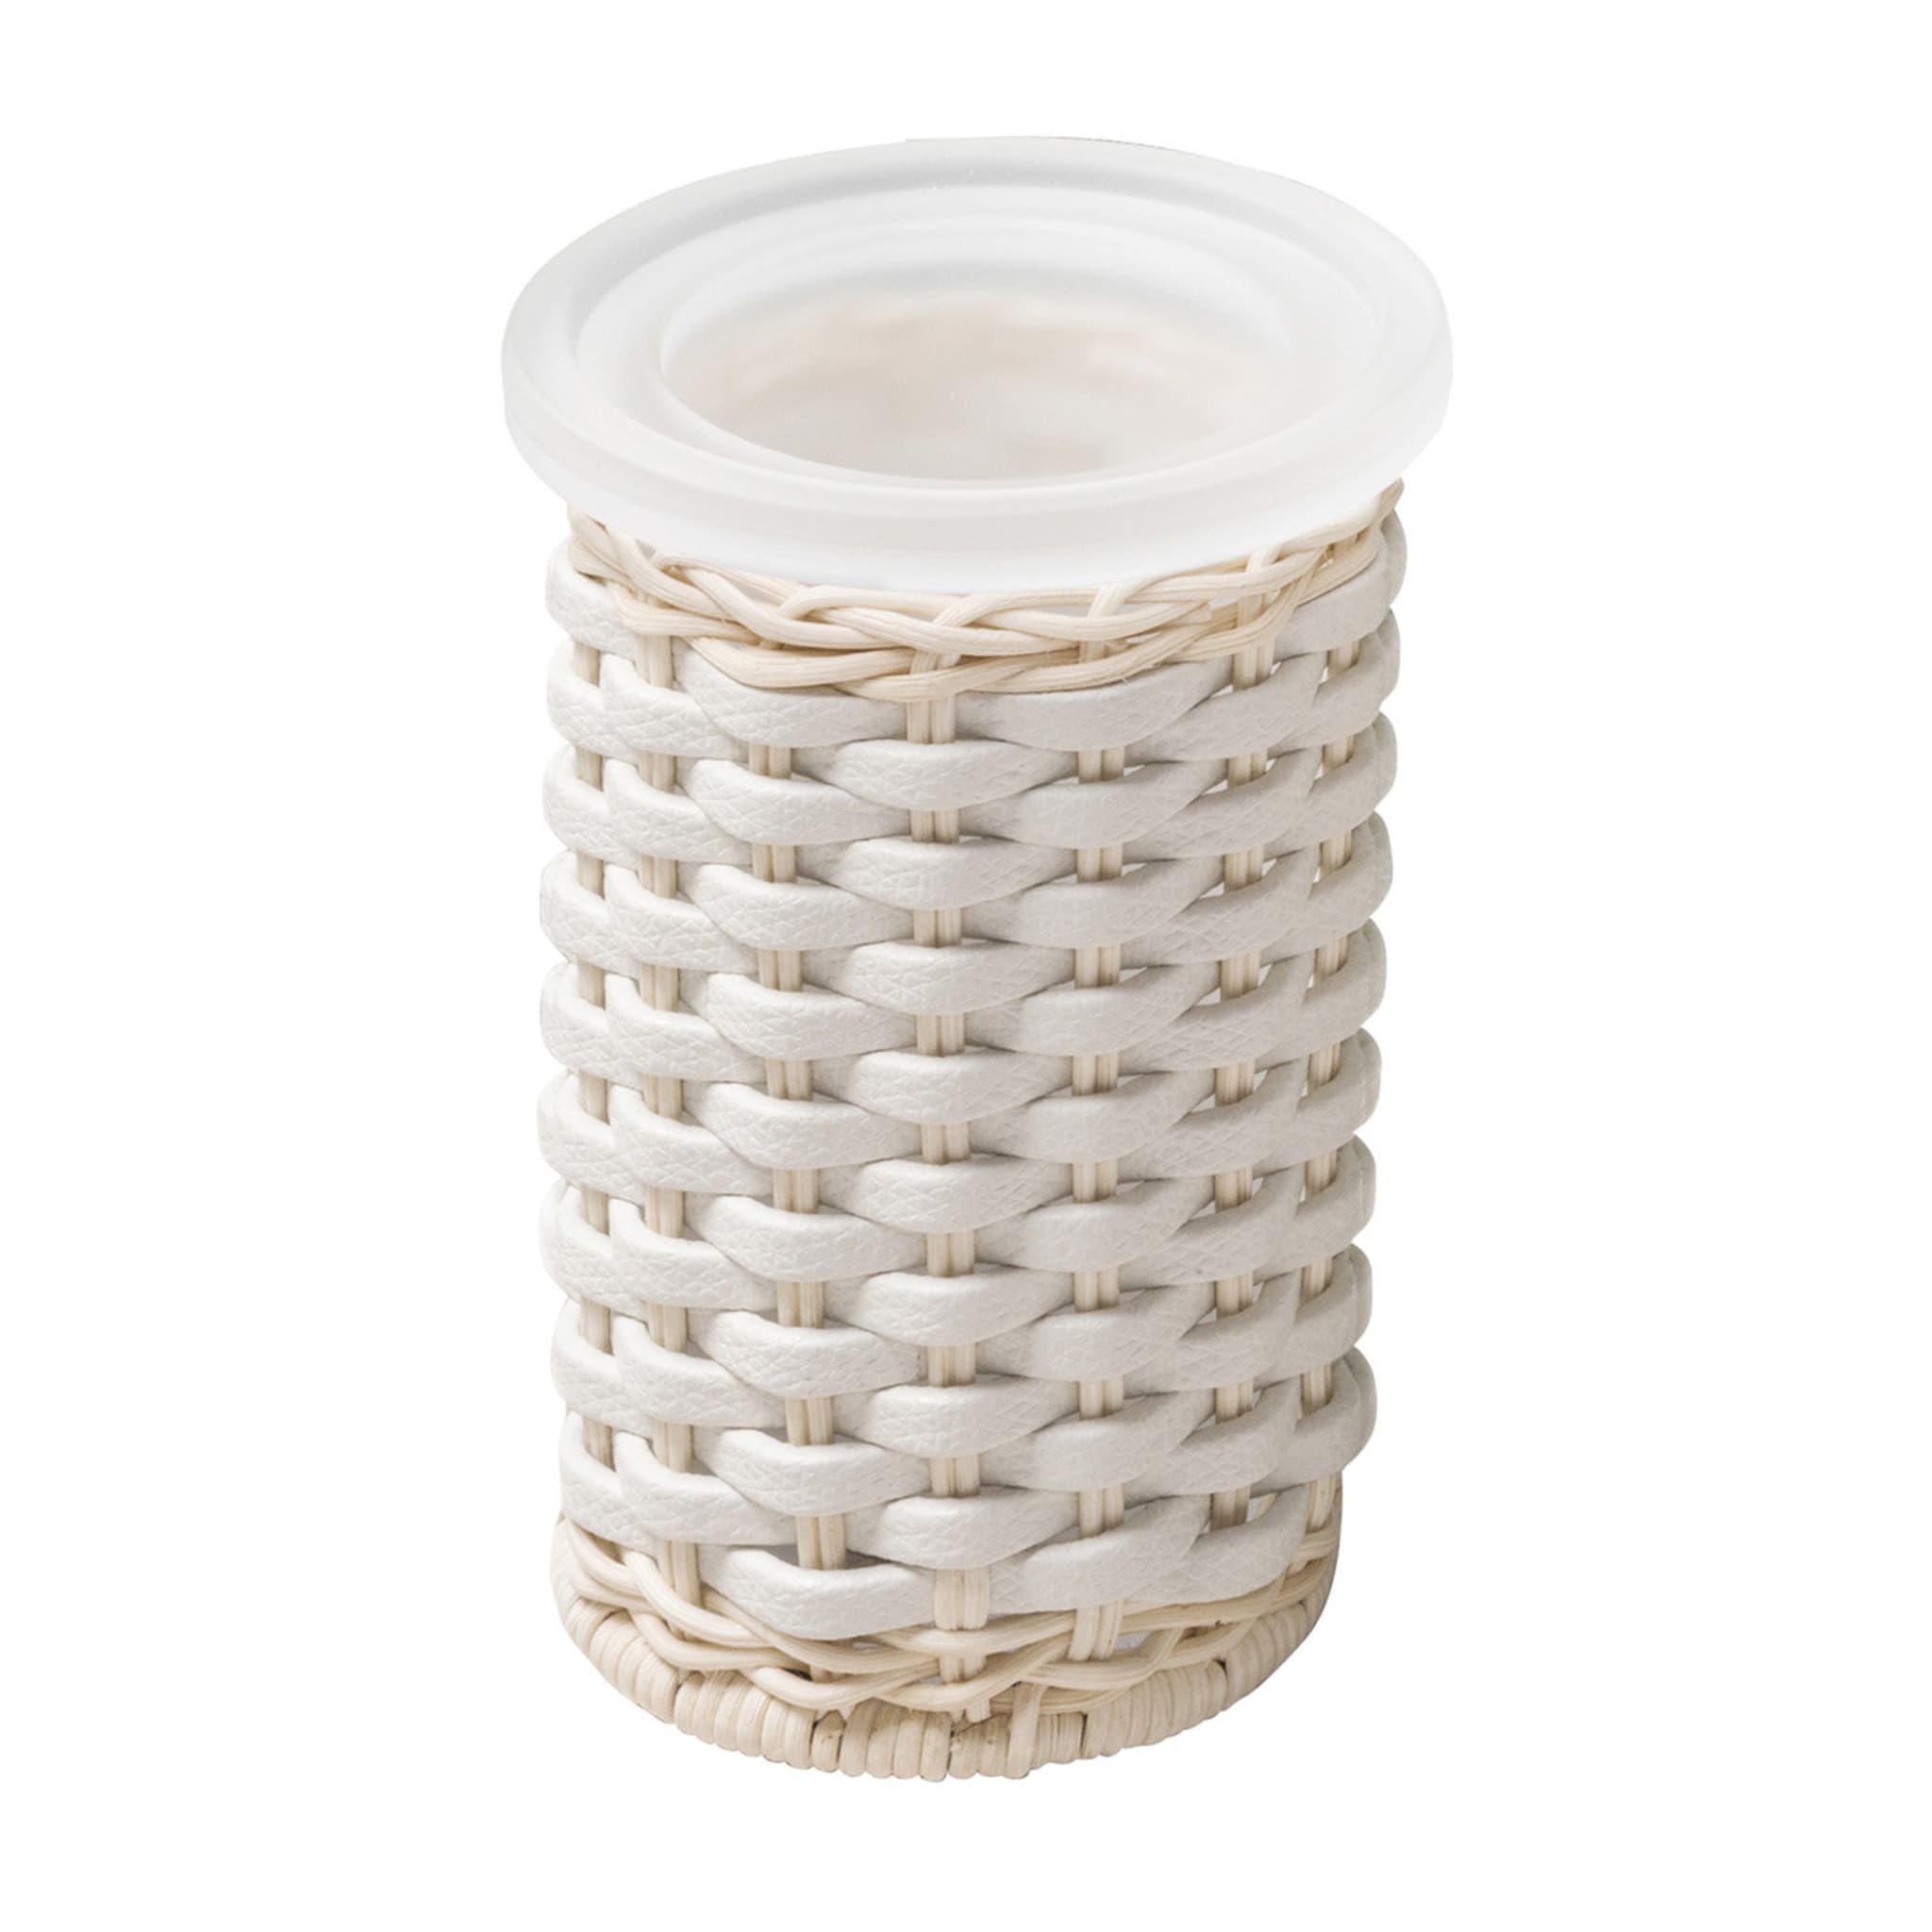 Calais White Leather & Rattan Soap Dispenser and Toothbrush Holder - Alternative view 3